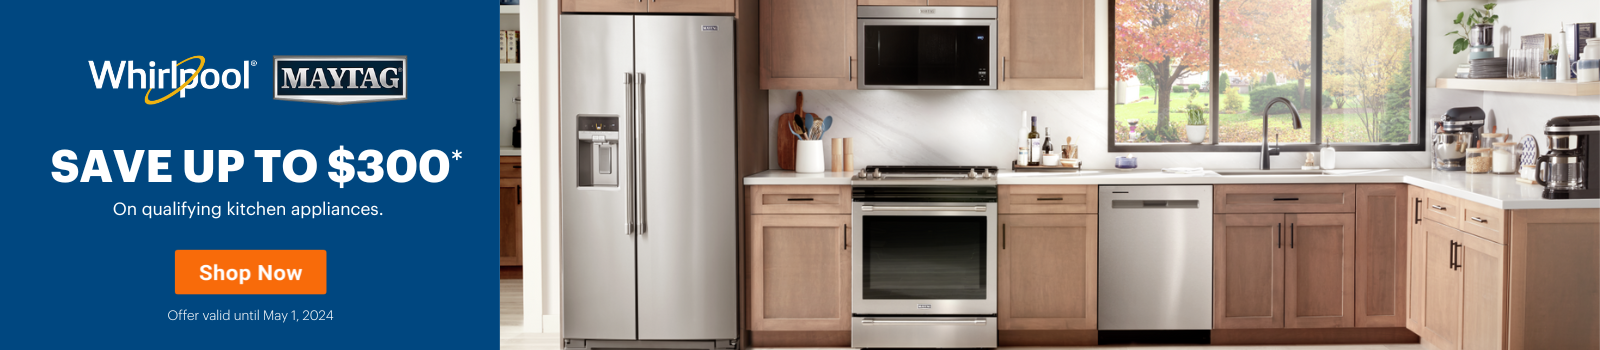 Whirlpool & Maytag -Kitchen Offer - Mar 28 - May 28, 2024